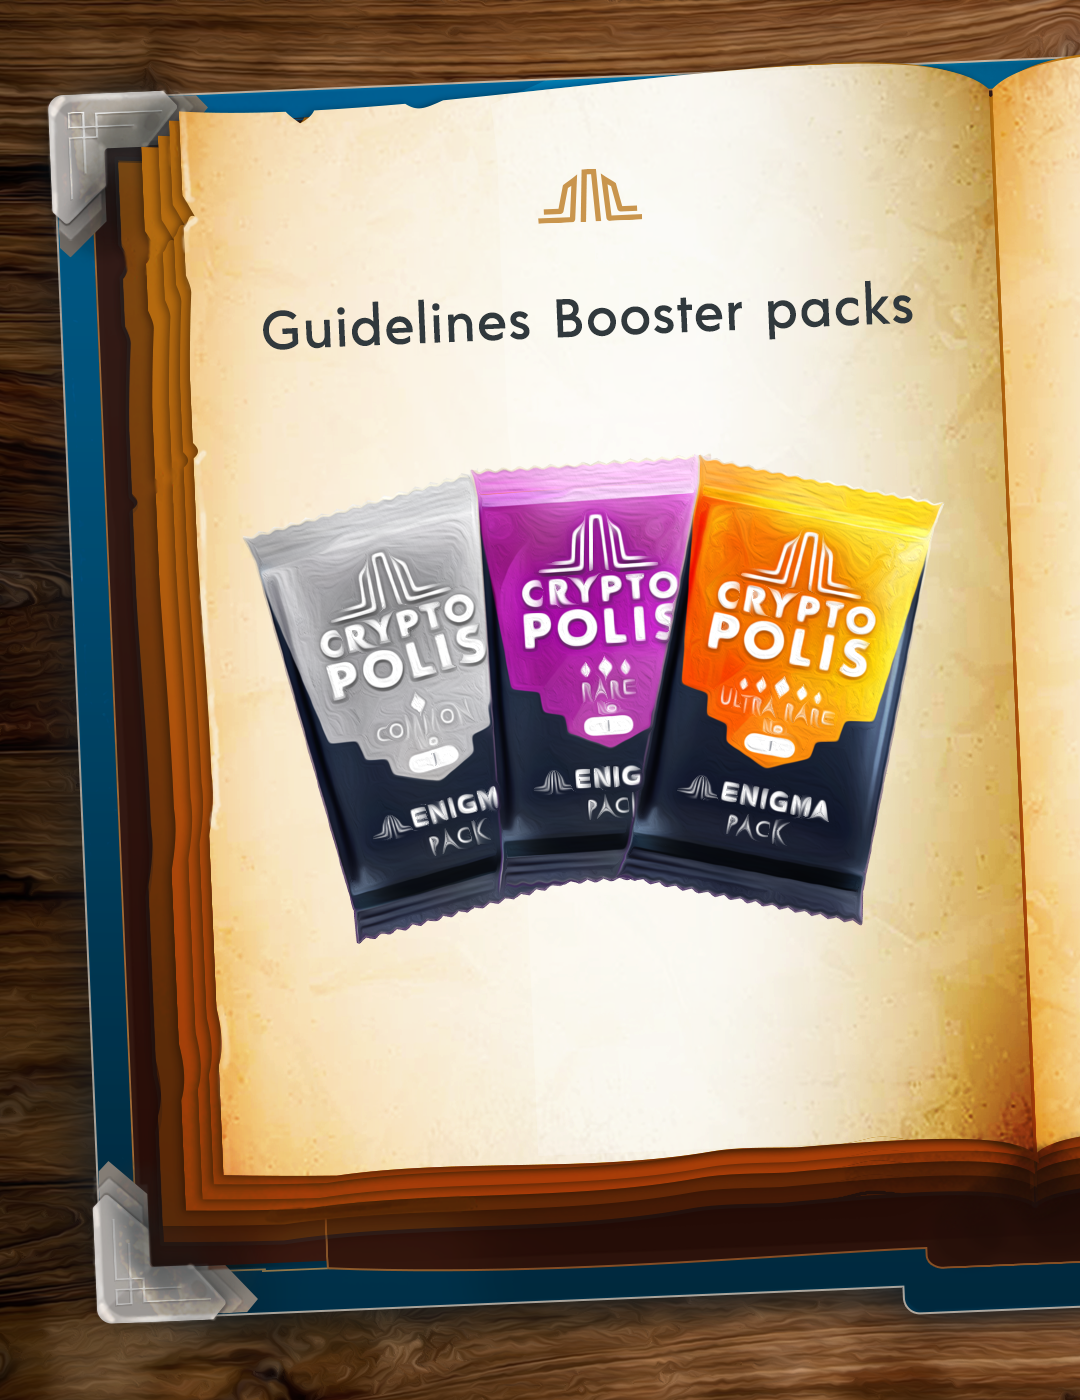 COMPLETE GUIDELINES BOOSTER PACKS